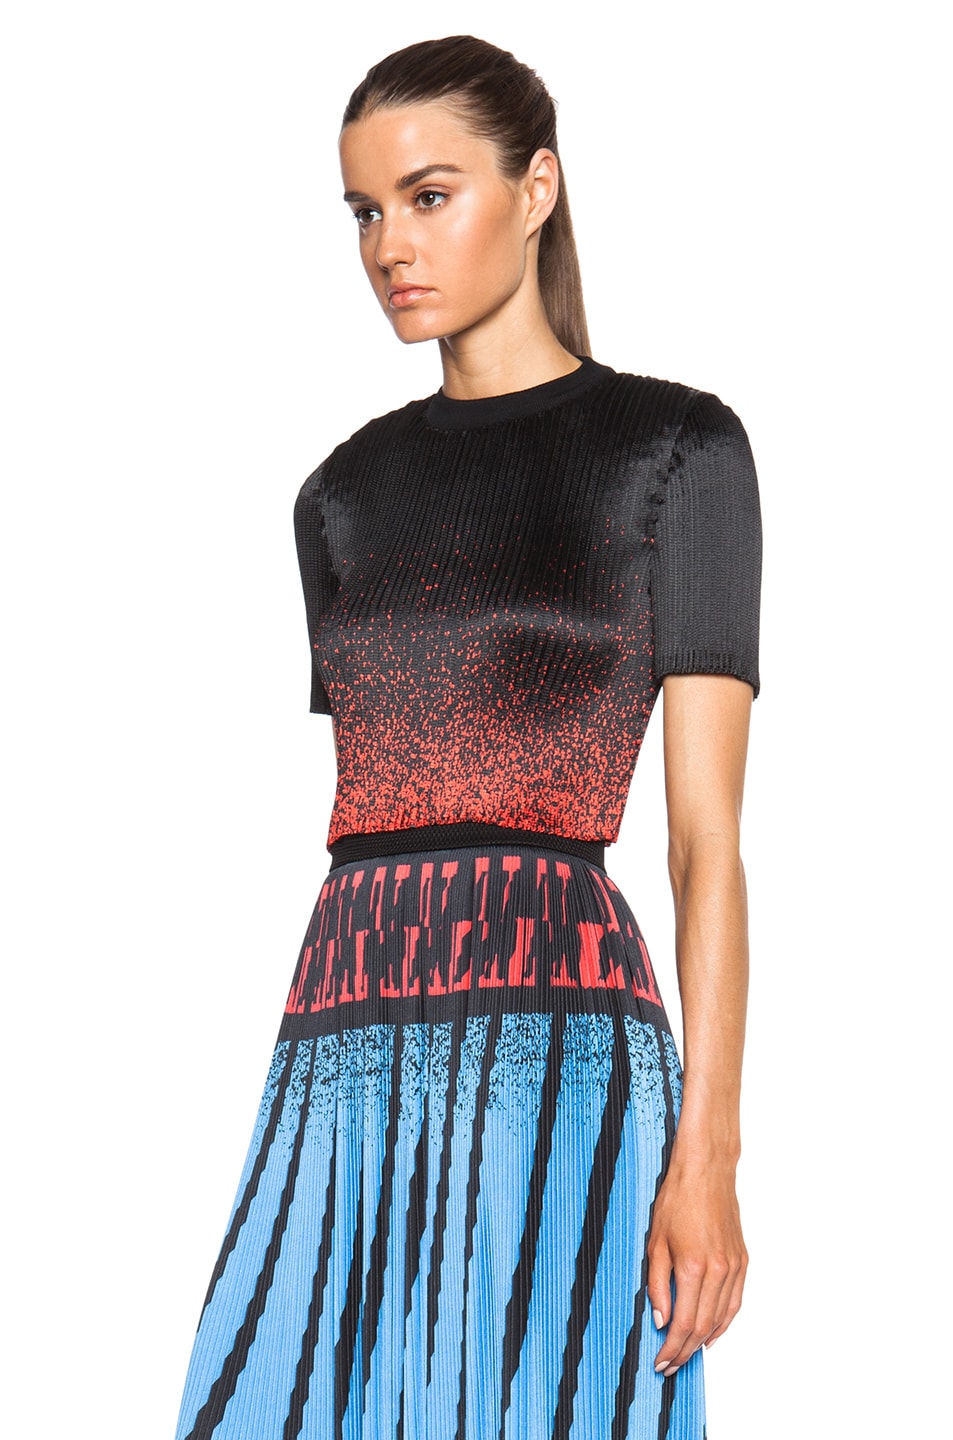 Alexander Wang Ribbed Micro Pleat Crop Top in Lacquer Spray | FWRD